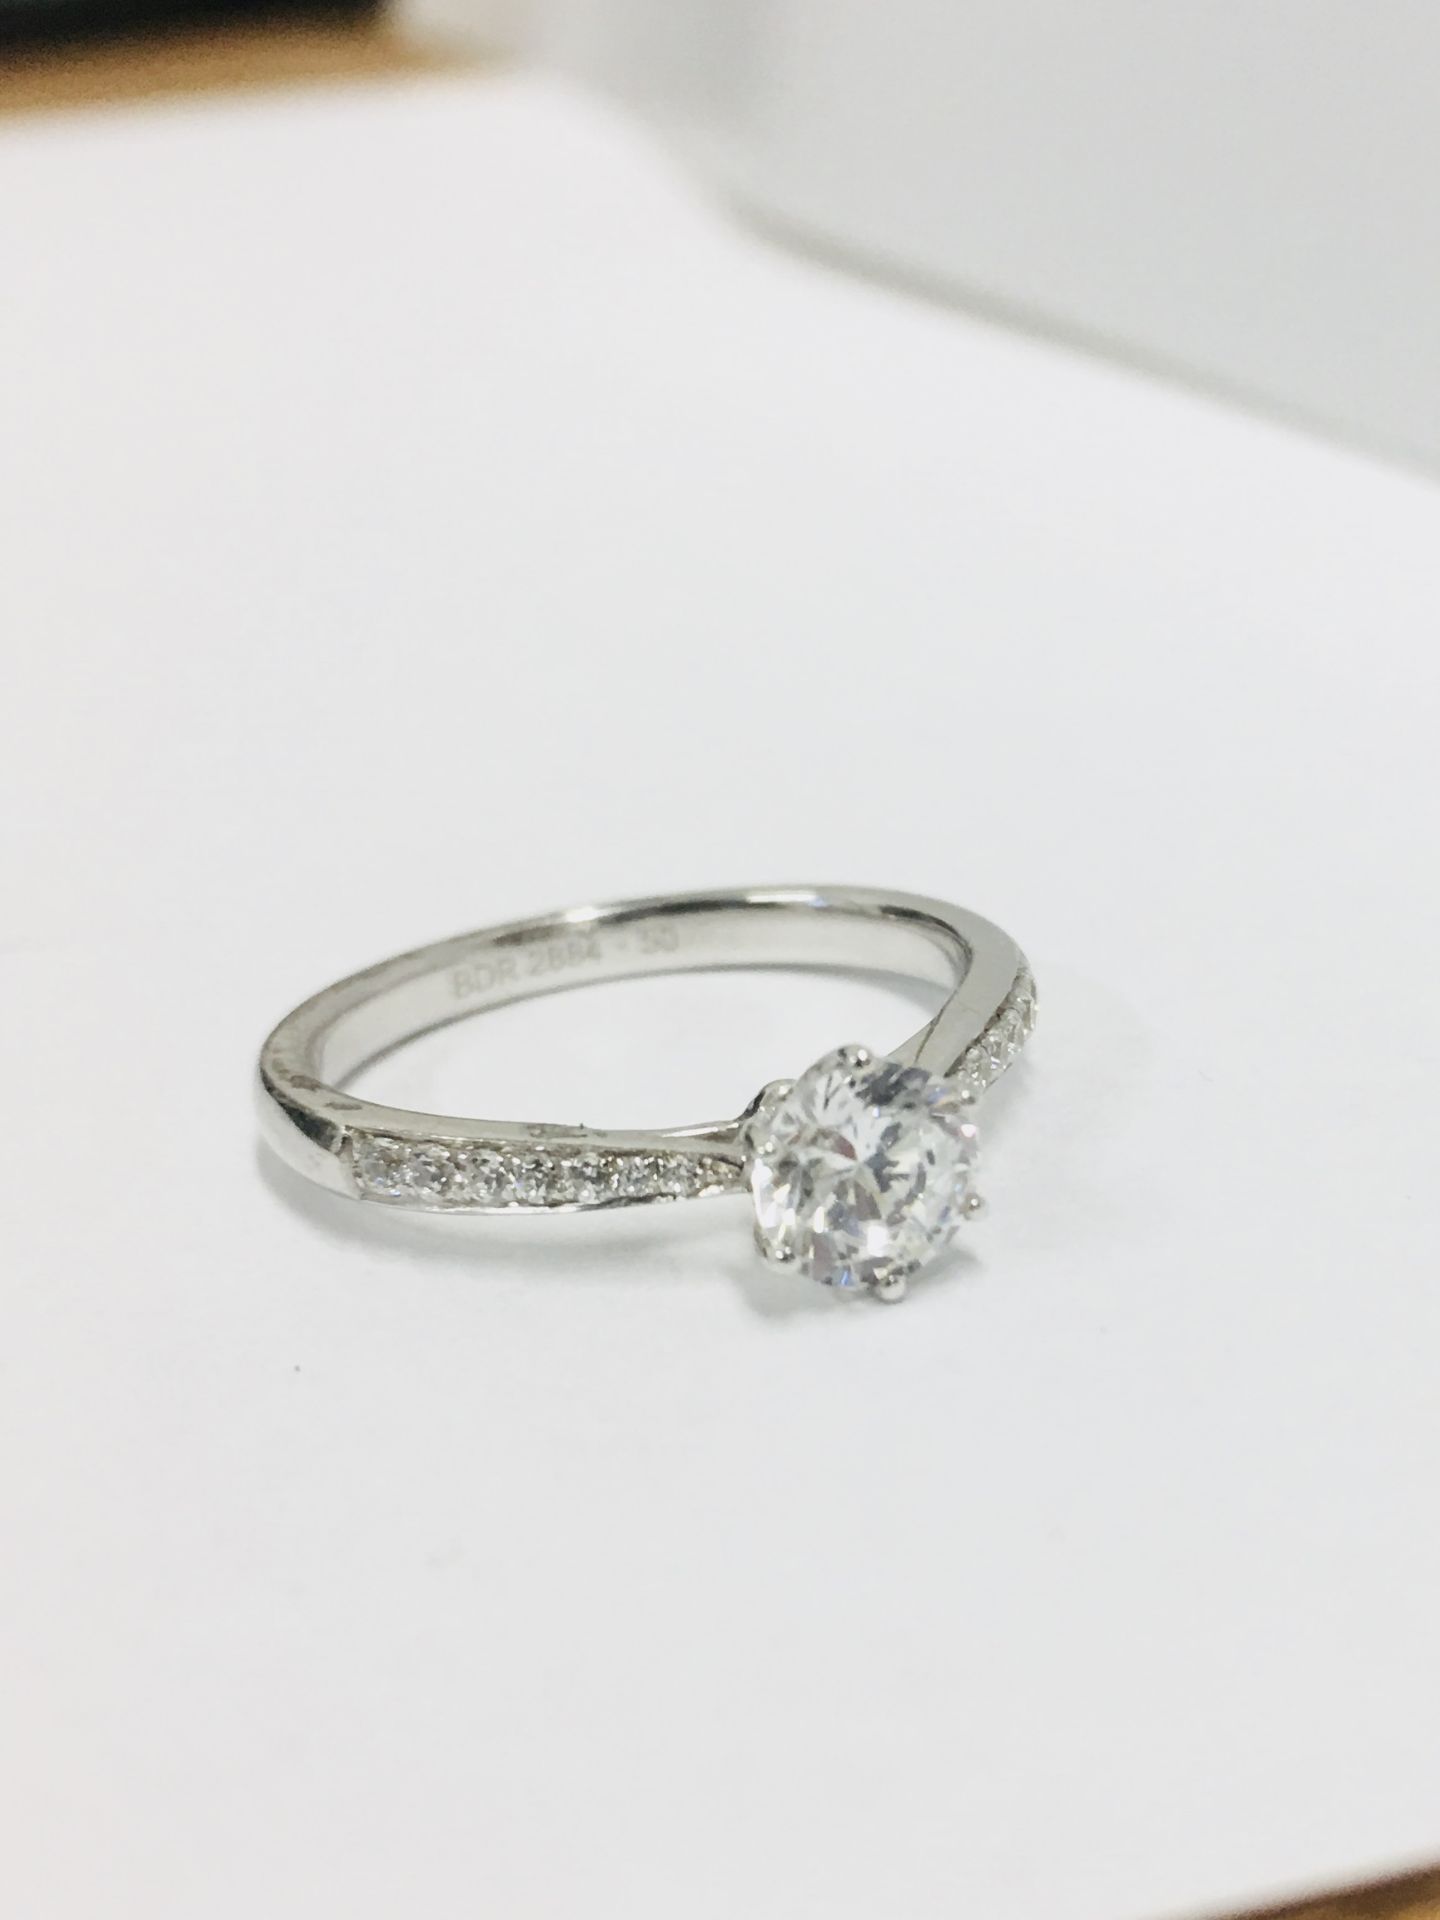 1ct diamond solitaire ring with diamond set shoulders,1.01ct natural brilliant cut diamond si2 - Image 4 of 4